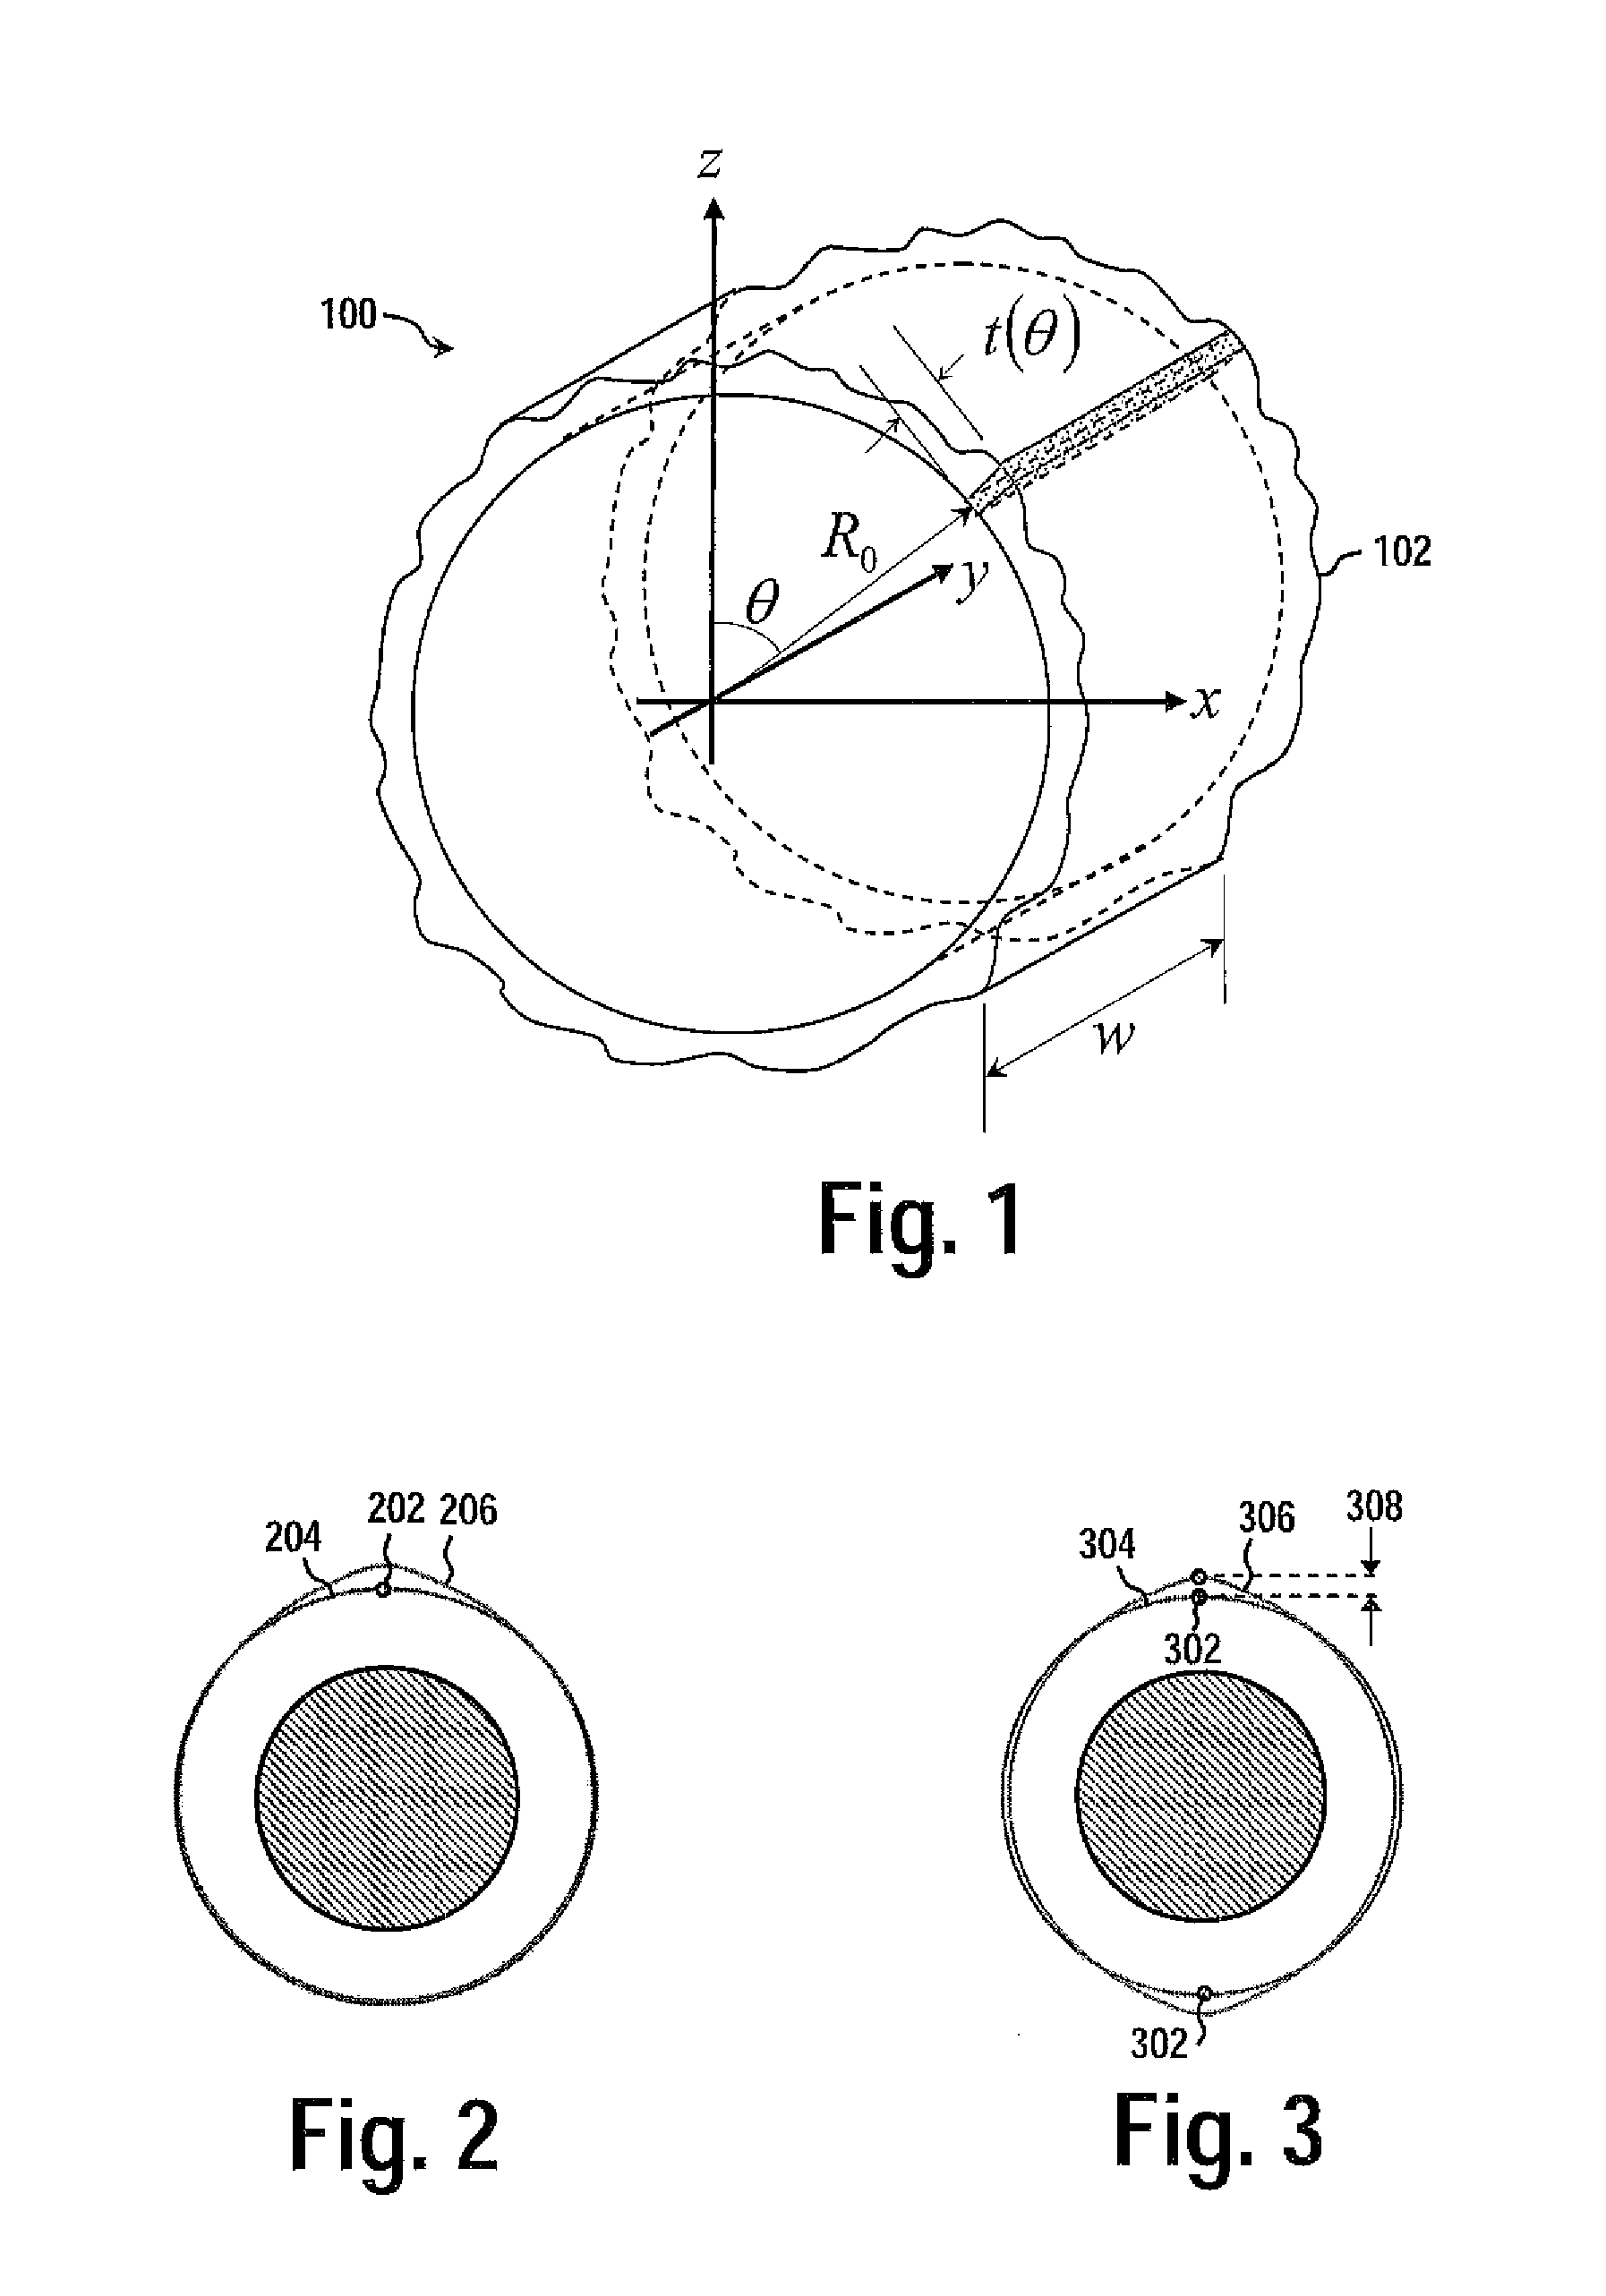 Method for prediction and control of tire uniformity parameters from crown thickness variation